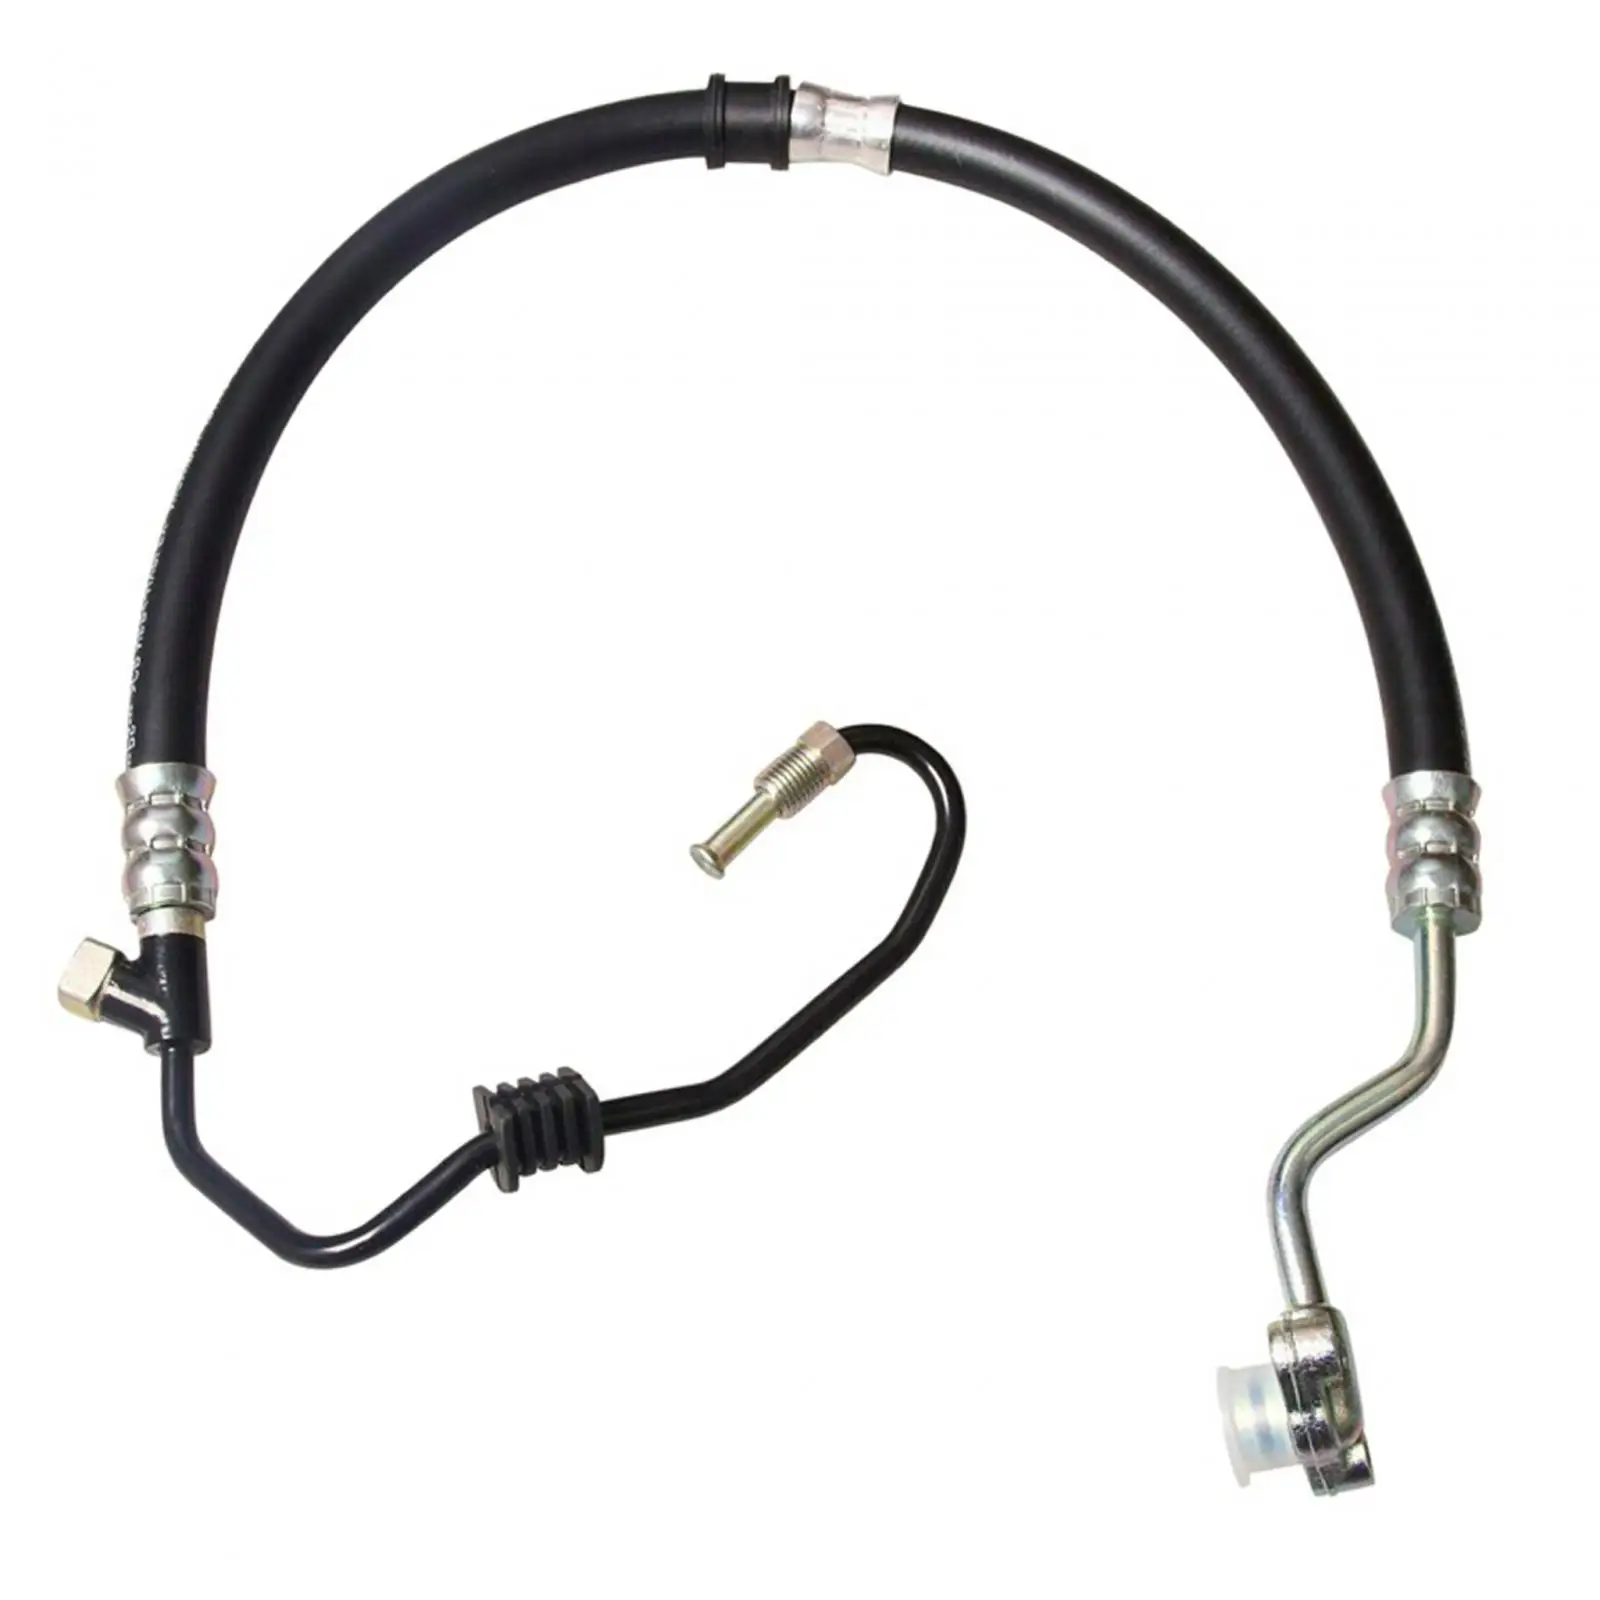 Power Steering Hose Assembly 53713-s84-a04 Spare Parts Repair Parts Replaces Easy Installation Accessory for Honda Accord